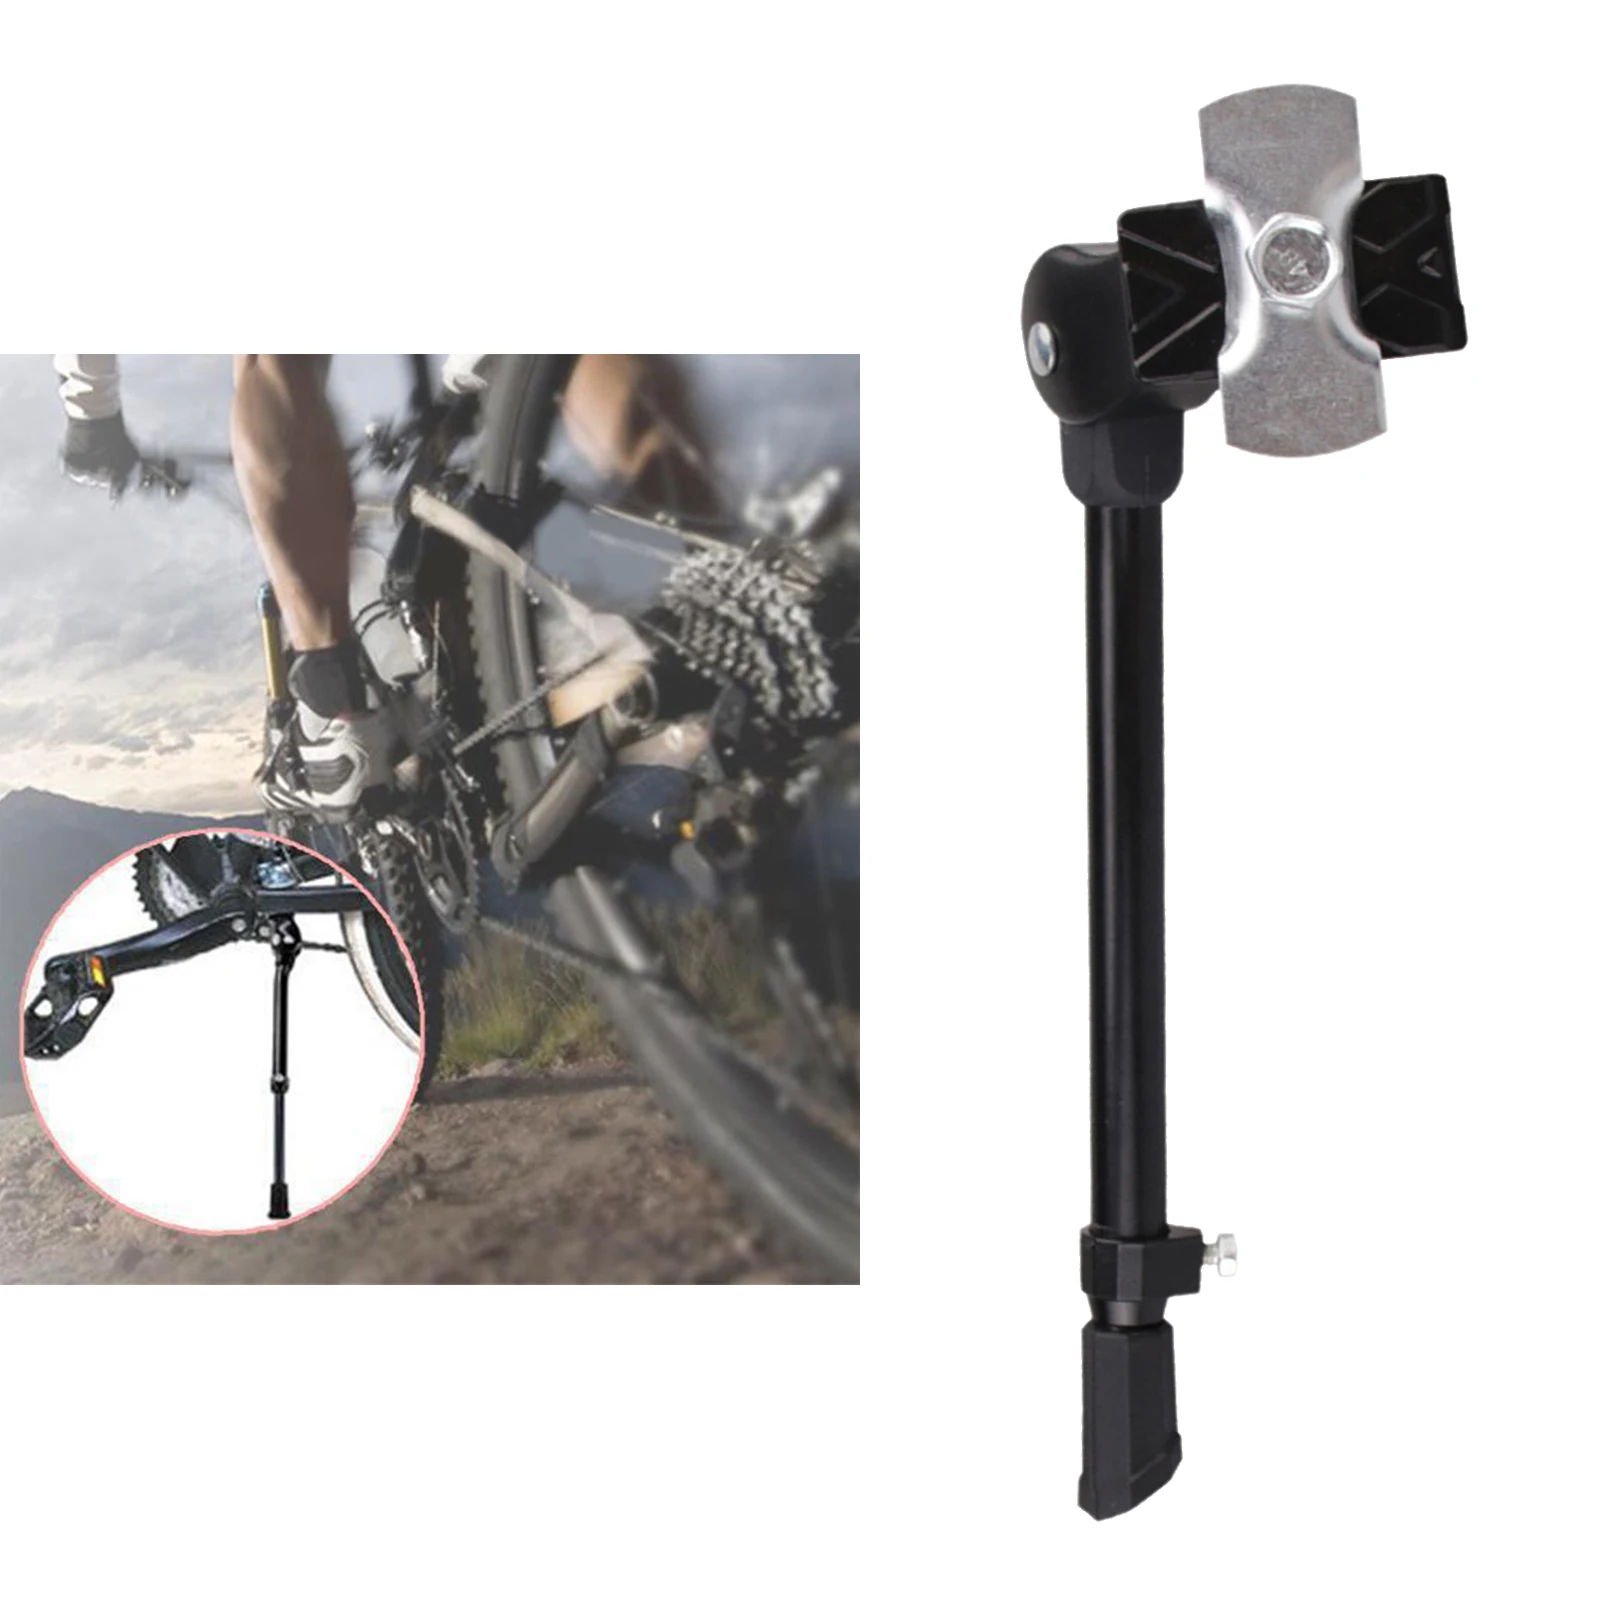 MTB Bike Kickstand Alloy Stable Rear Side Support Stand Prop Easy Install Single Leg for 24-27 inch Bicycle Parking